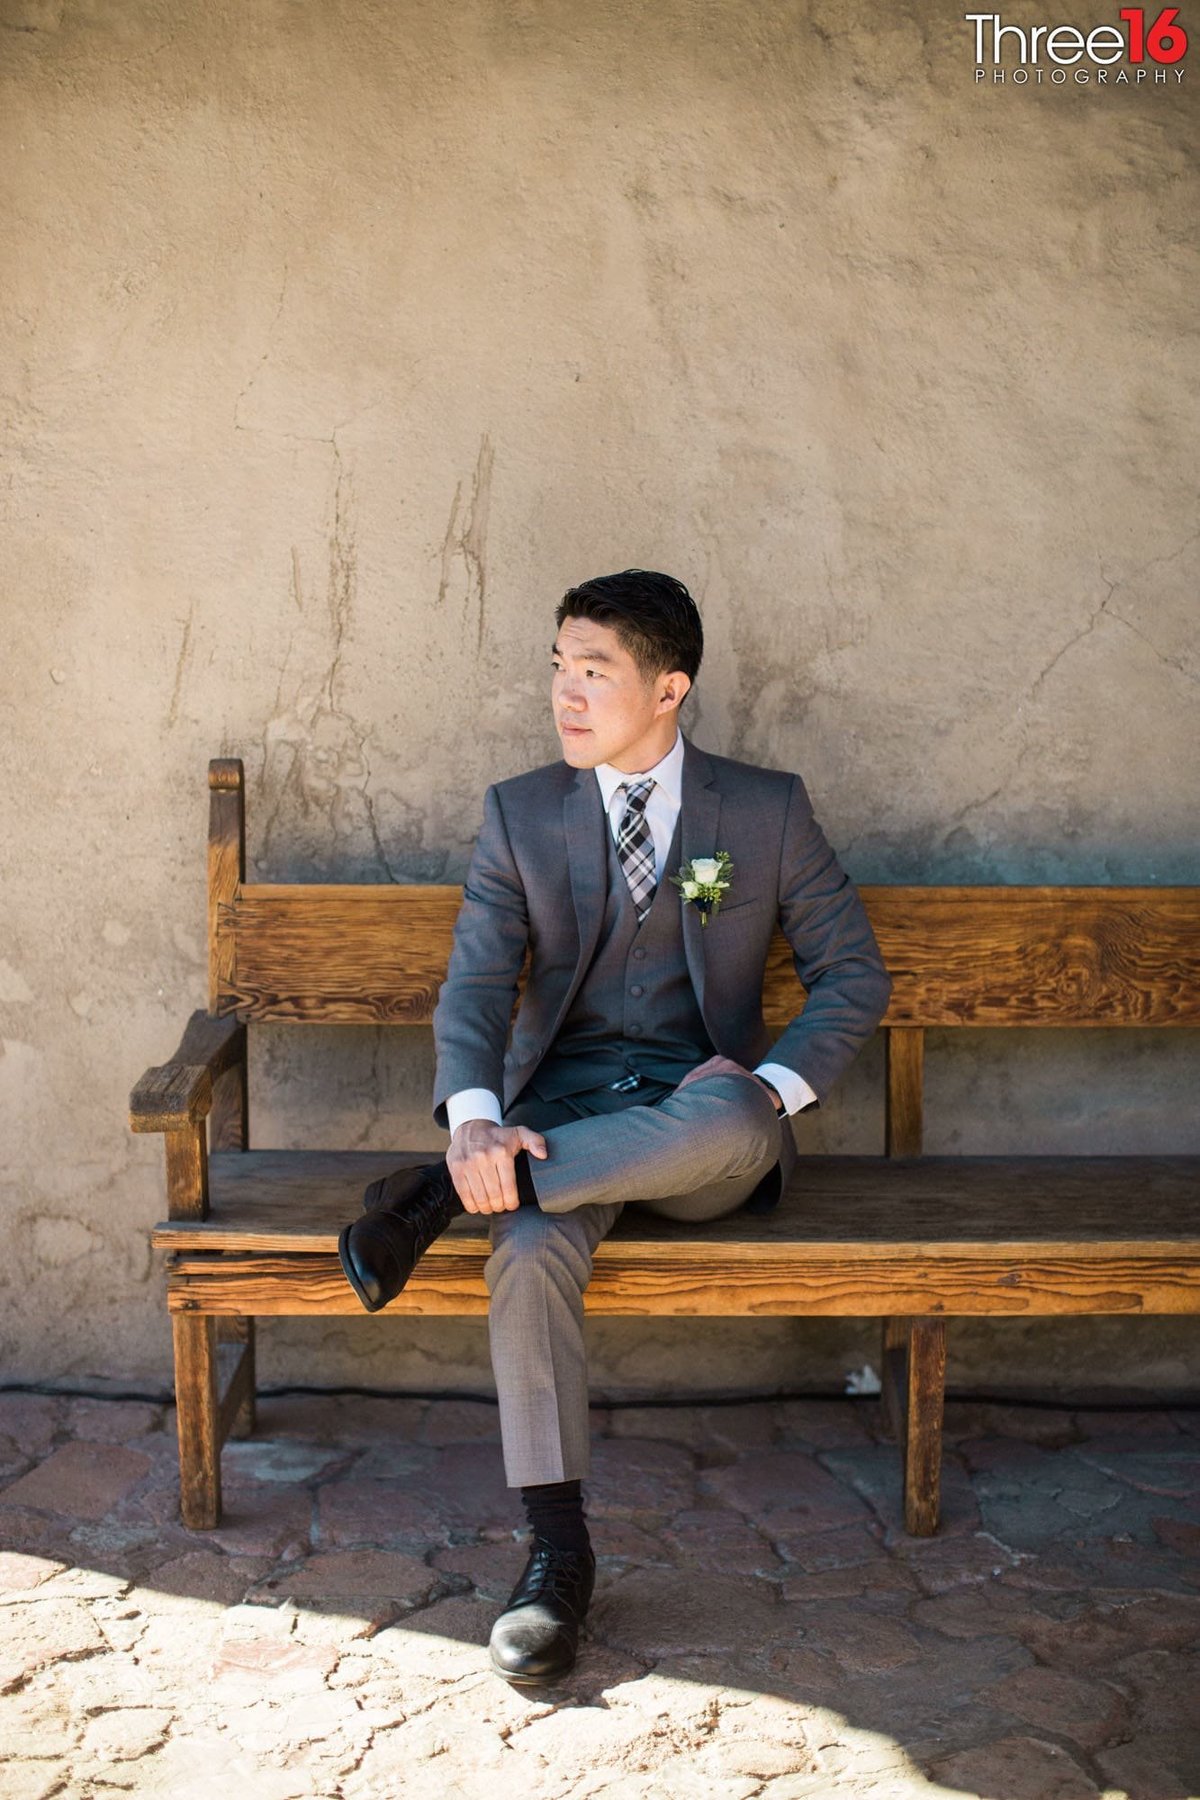 Groom sitting on wood bench contemplating before the wedding ceremony